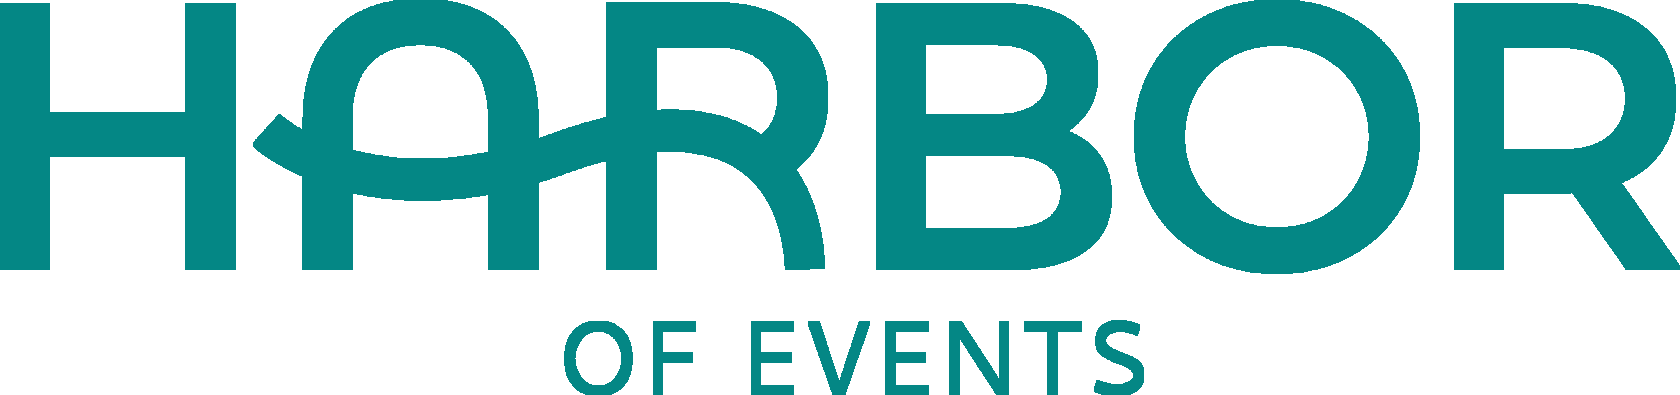 Event Agency Harbor of events